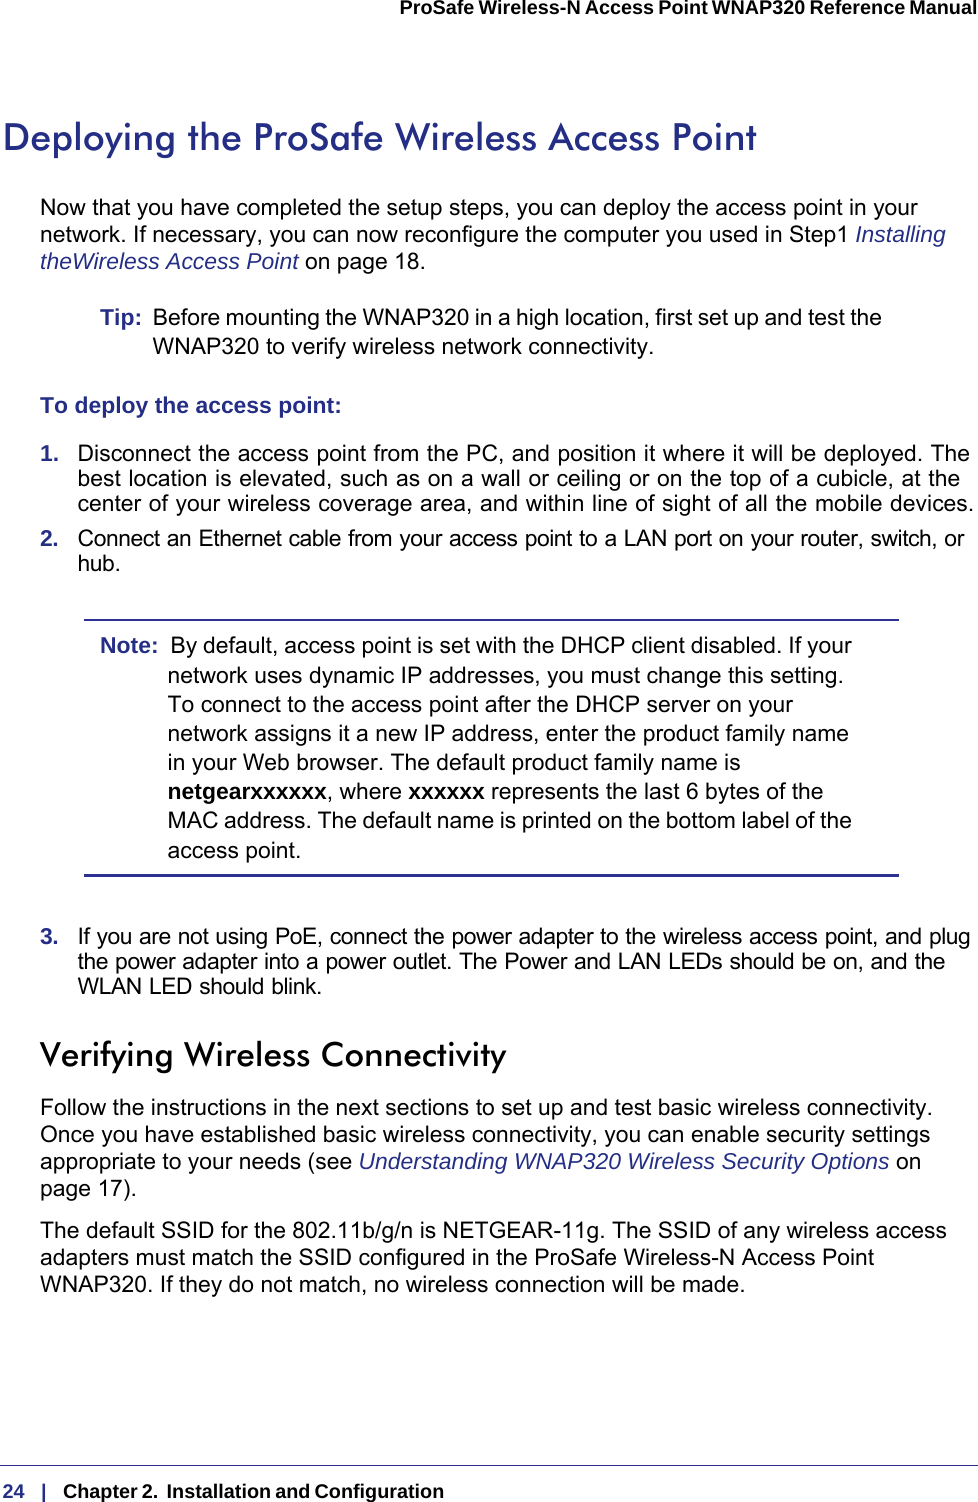 24   |   Chapter 2.  Installation and Configuration  ProSafe Wireless-N Access Point WNAP320 Reference Manual Deploying the ProSafe Wireless Access PointNow that you have completed the setup steps, you can deploy the access point in your network. If necessary, you can now reconfigure the computer you used in Step1 Installing theWireless Access Point on page  18. Tip:  Before mounting the WNAP320 in a high location, first set up and test the WNAP320 to verify wireless network connectivity.To deploy the access point:1.  Disconnect the access point from the PC, and position it where it will be deployed. The best location is elevated, such as on a wall or ceiling or on the top of a cubicle, at the center of your wireless coverage area, and within line of sight of all the mobile devices.2.  Connect an Ethernet cable from your access point to a LAN port on your router, switch, or hub. Note:  By default, access point is set with the DHCP client disabled. If your network uses dynamic IP addresses, you must change this setting. To connect to the access point after the DHCP server on your network assigns it a new IP address, enter the product family name in your Web browser. The default product family name is netgearxxxxxx, where xxxxxx represents the last 6 bytes of the MAC address. The default name is printed on the bottom label of the access point.3.  If you are not using PoE, connect the power adapter to the wireless access point, and plug the power adapter into a power outlet. The Power and LAN LEDs should be on, and the WLAN LED should blink.Verifying Wireless ConnectivityFollow the instructions in the next sections to set up and test basic wireless connectivity. Once you have established basic wireless connectivity, you can enable security settings appropriate to your needs (see Understanding WNAP320 Wireless Security Options on page  17).The default SSID for the 802.11b/g/n is NETGEAR-11g. The SSID of any wireless access adapters must match the SSID configured in the ProSafe Wireless-N Access Point WNAP320. If they do not match, no wireless connection will be made.